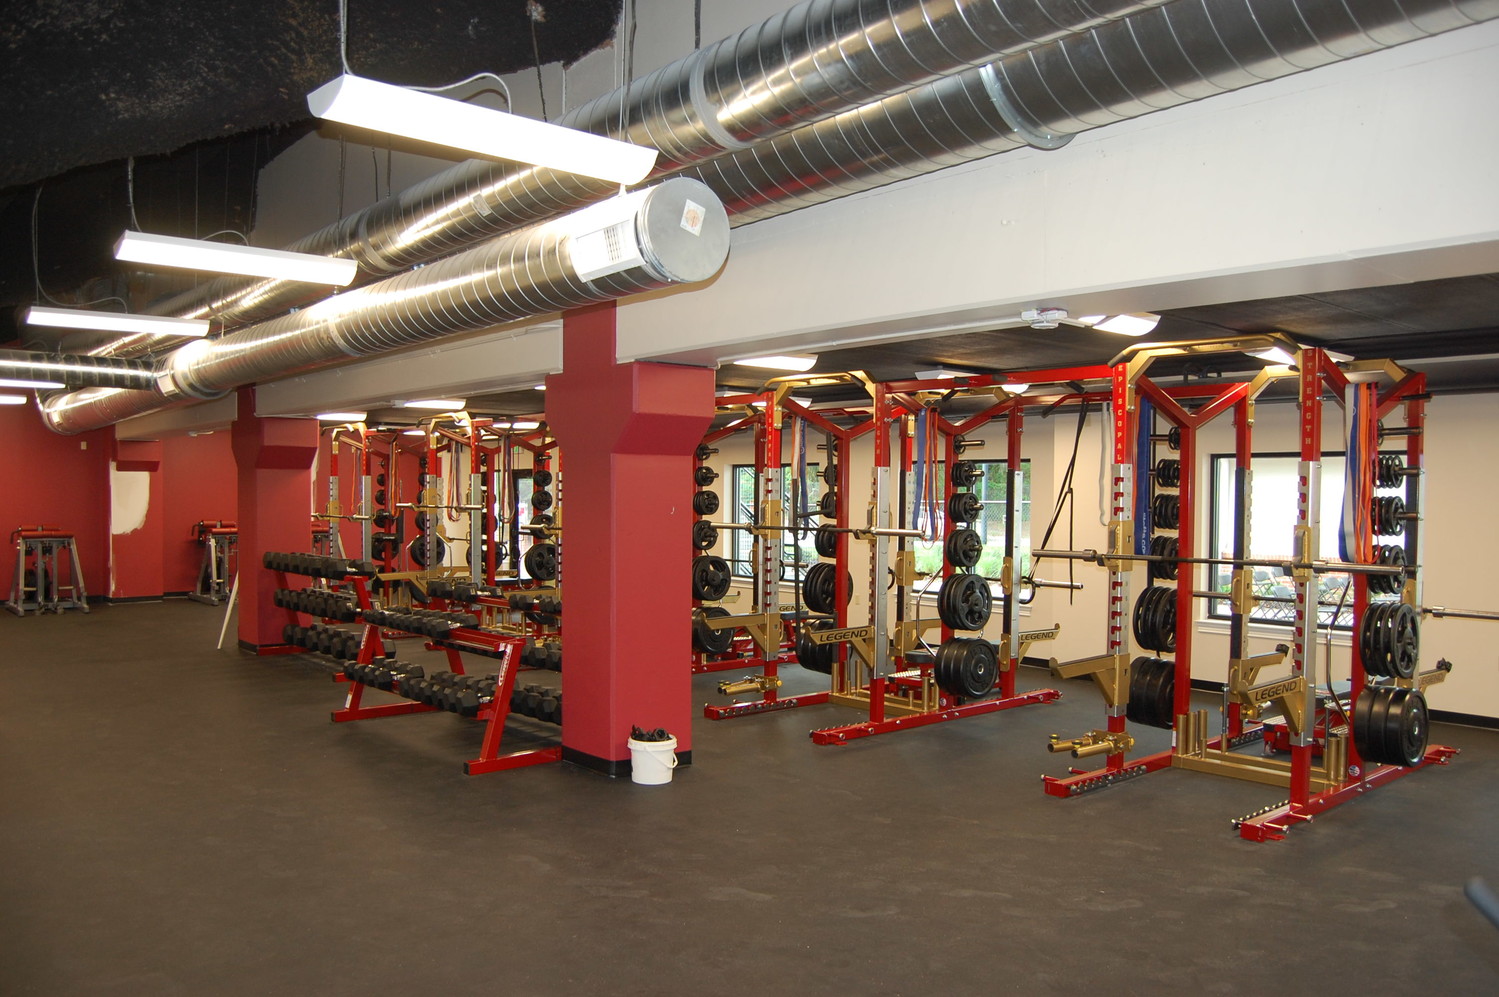 A fully equipped weight room for student-athletes was added as part of Episcopal’s Leading the Way campaign.